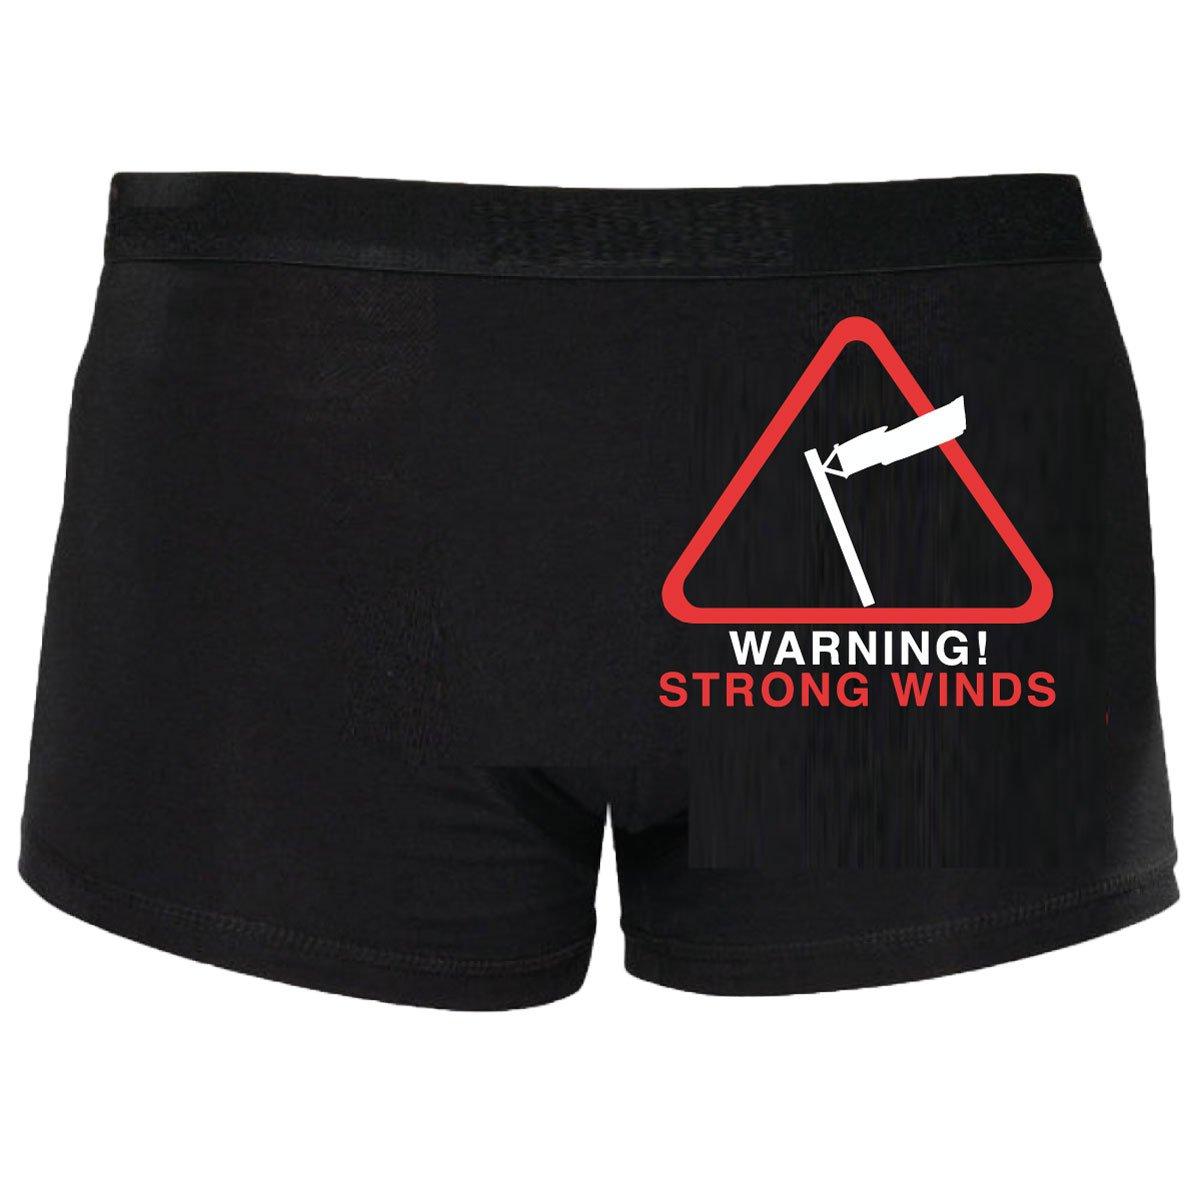 Funny Boxers Warning Strong Winds Fart Trump Shorty Boxers